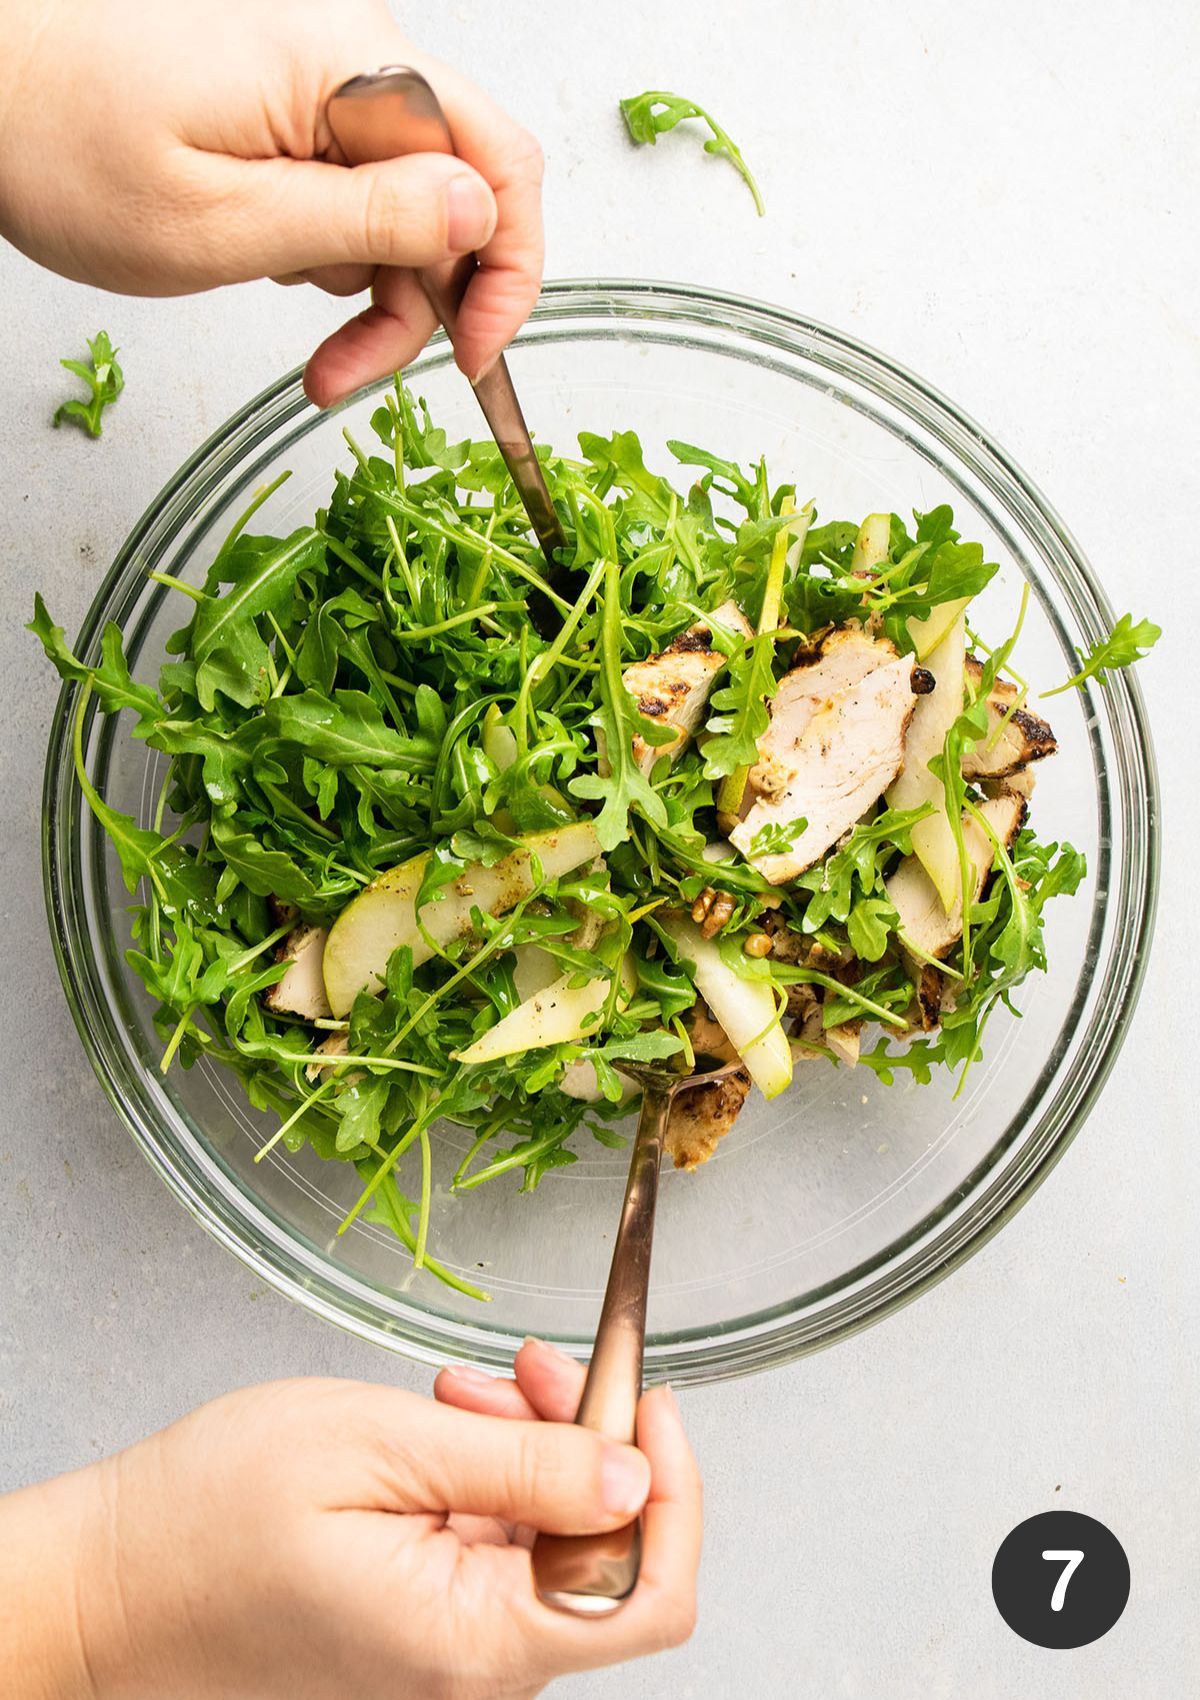 Tossing arugula chicken salad with two large forks.